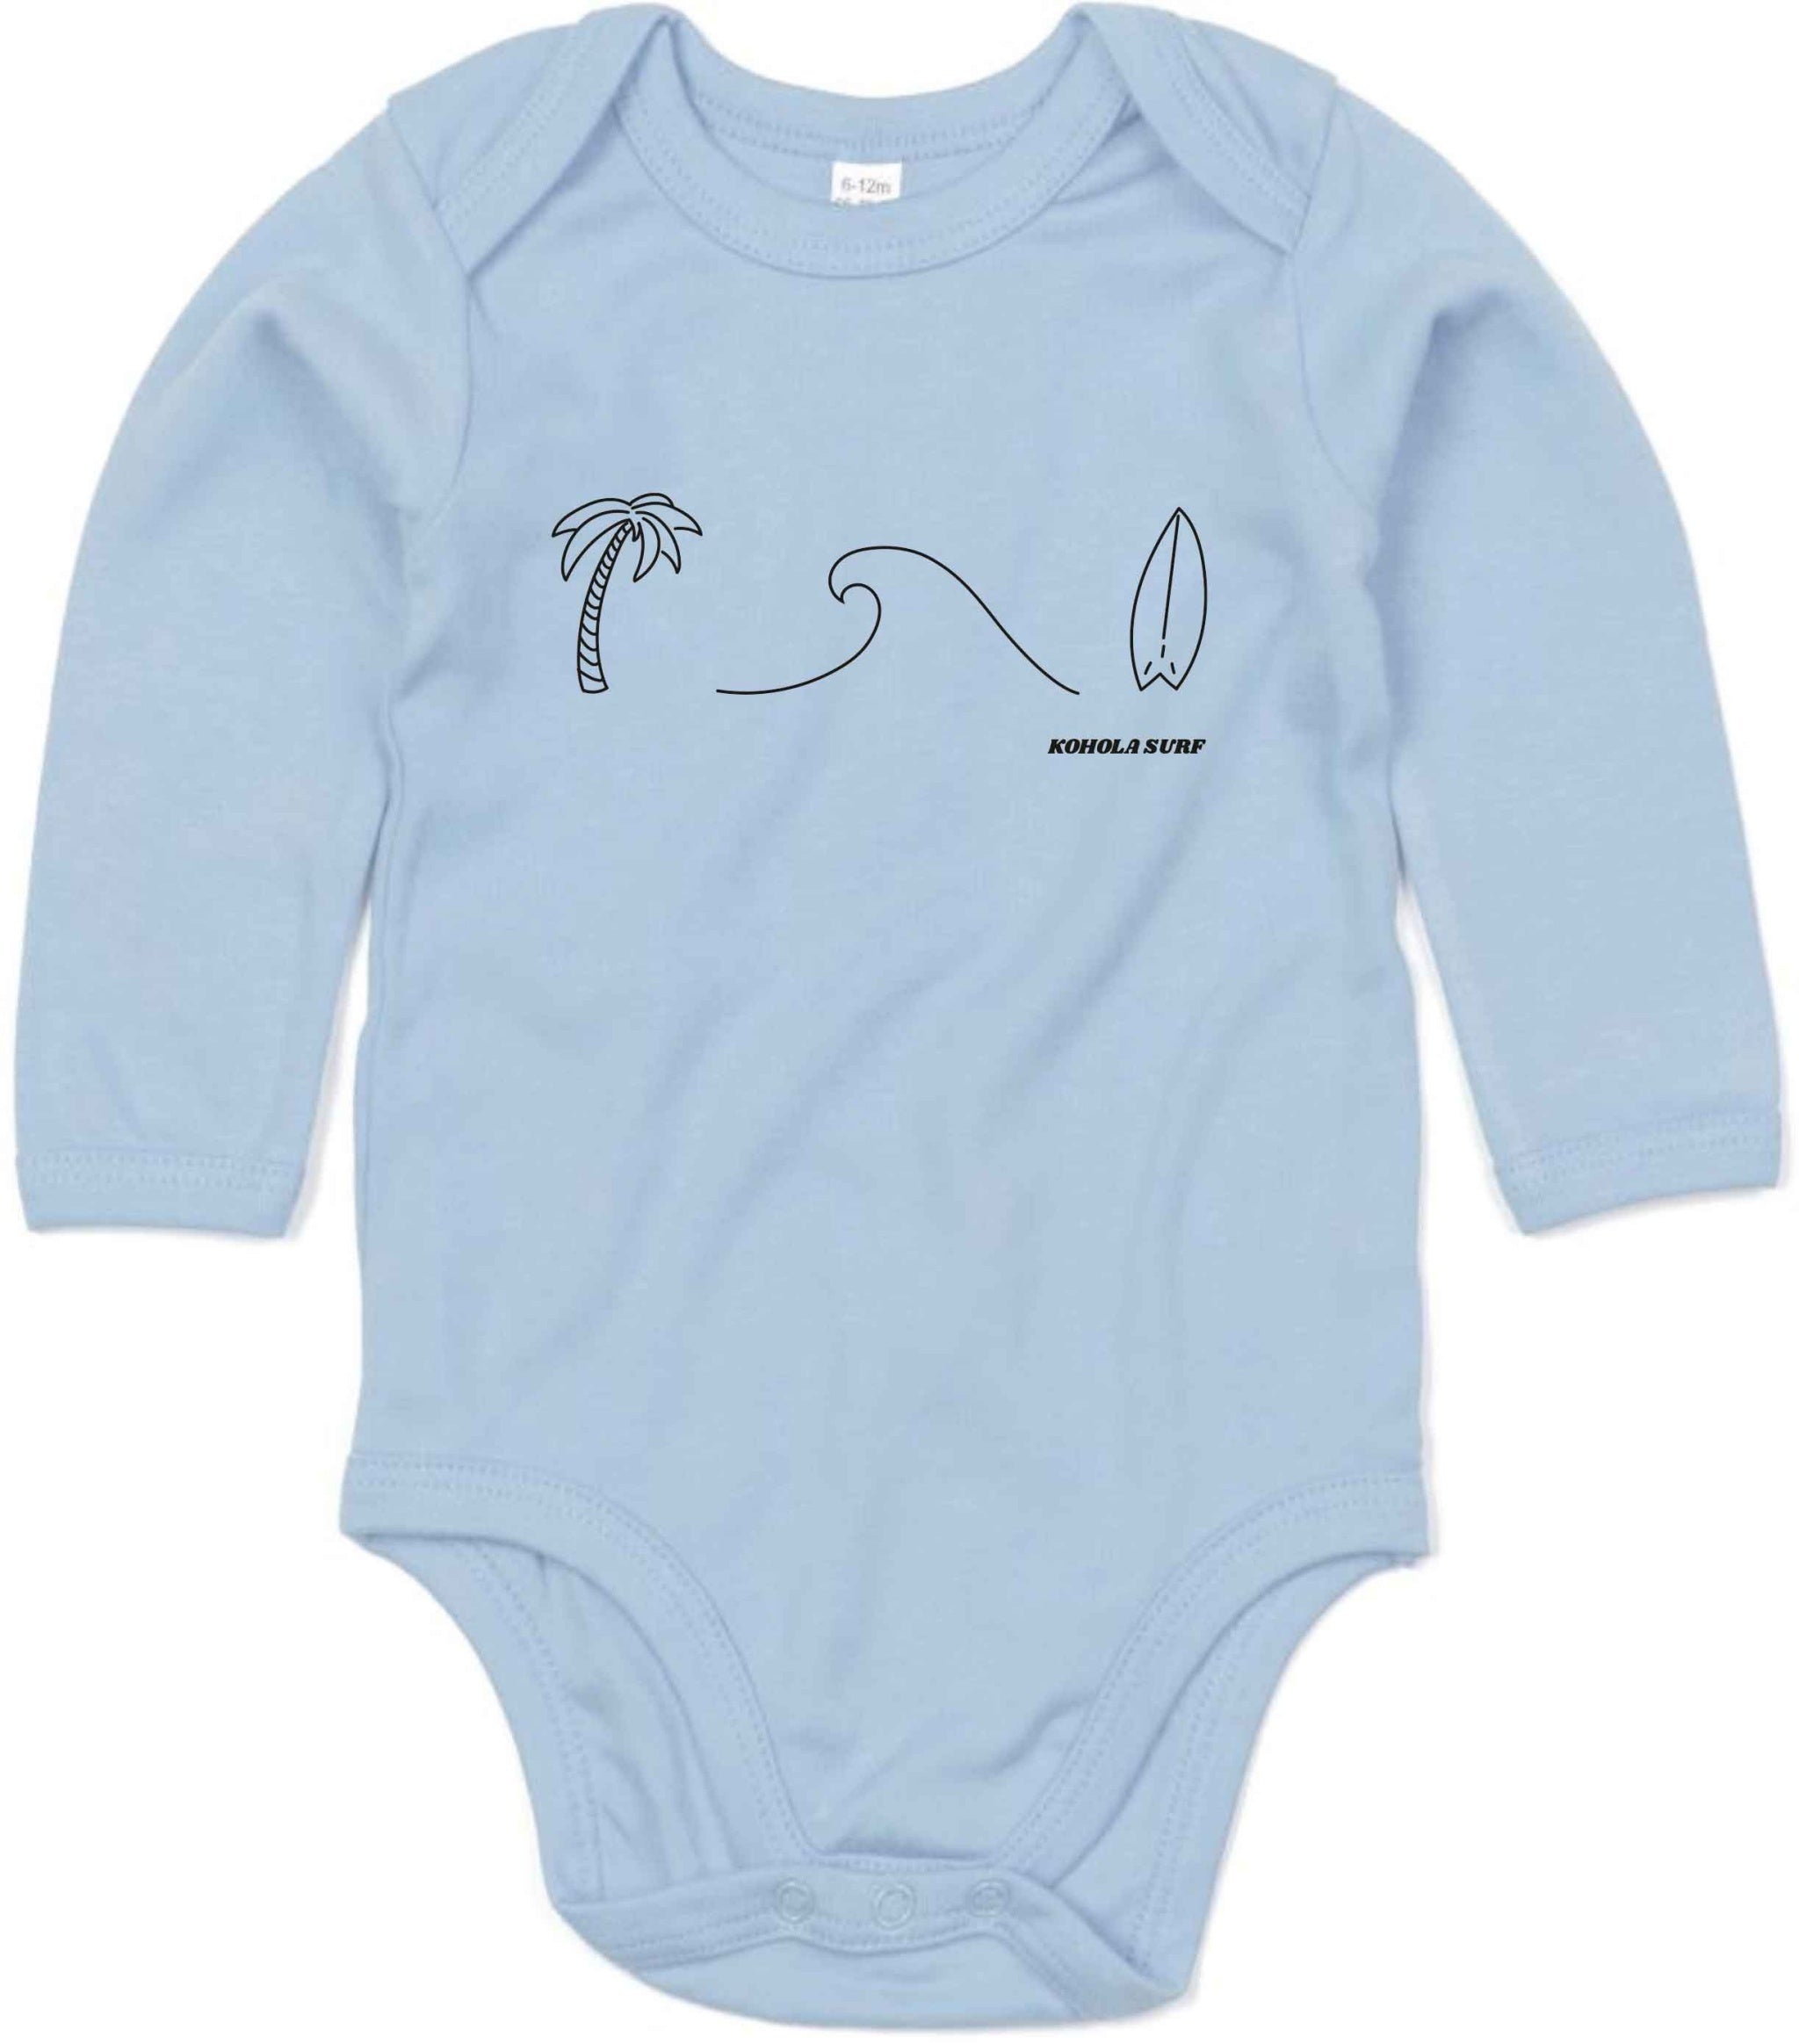 Palm Trees & Waves Baby Long-Sleeved Body